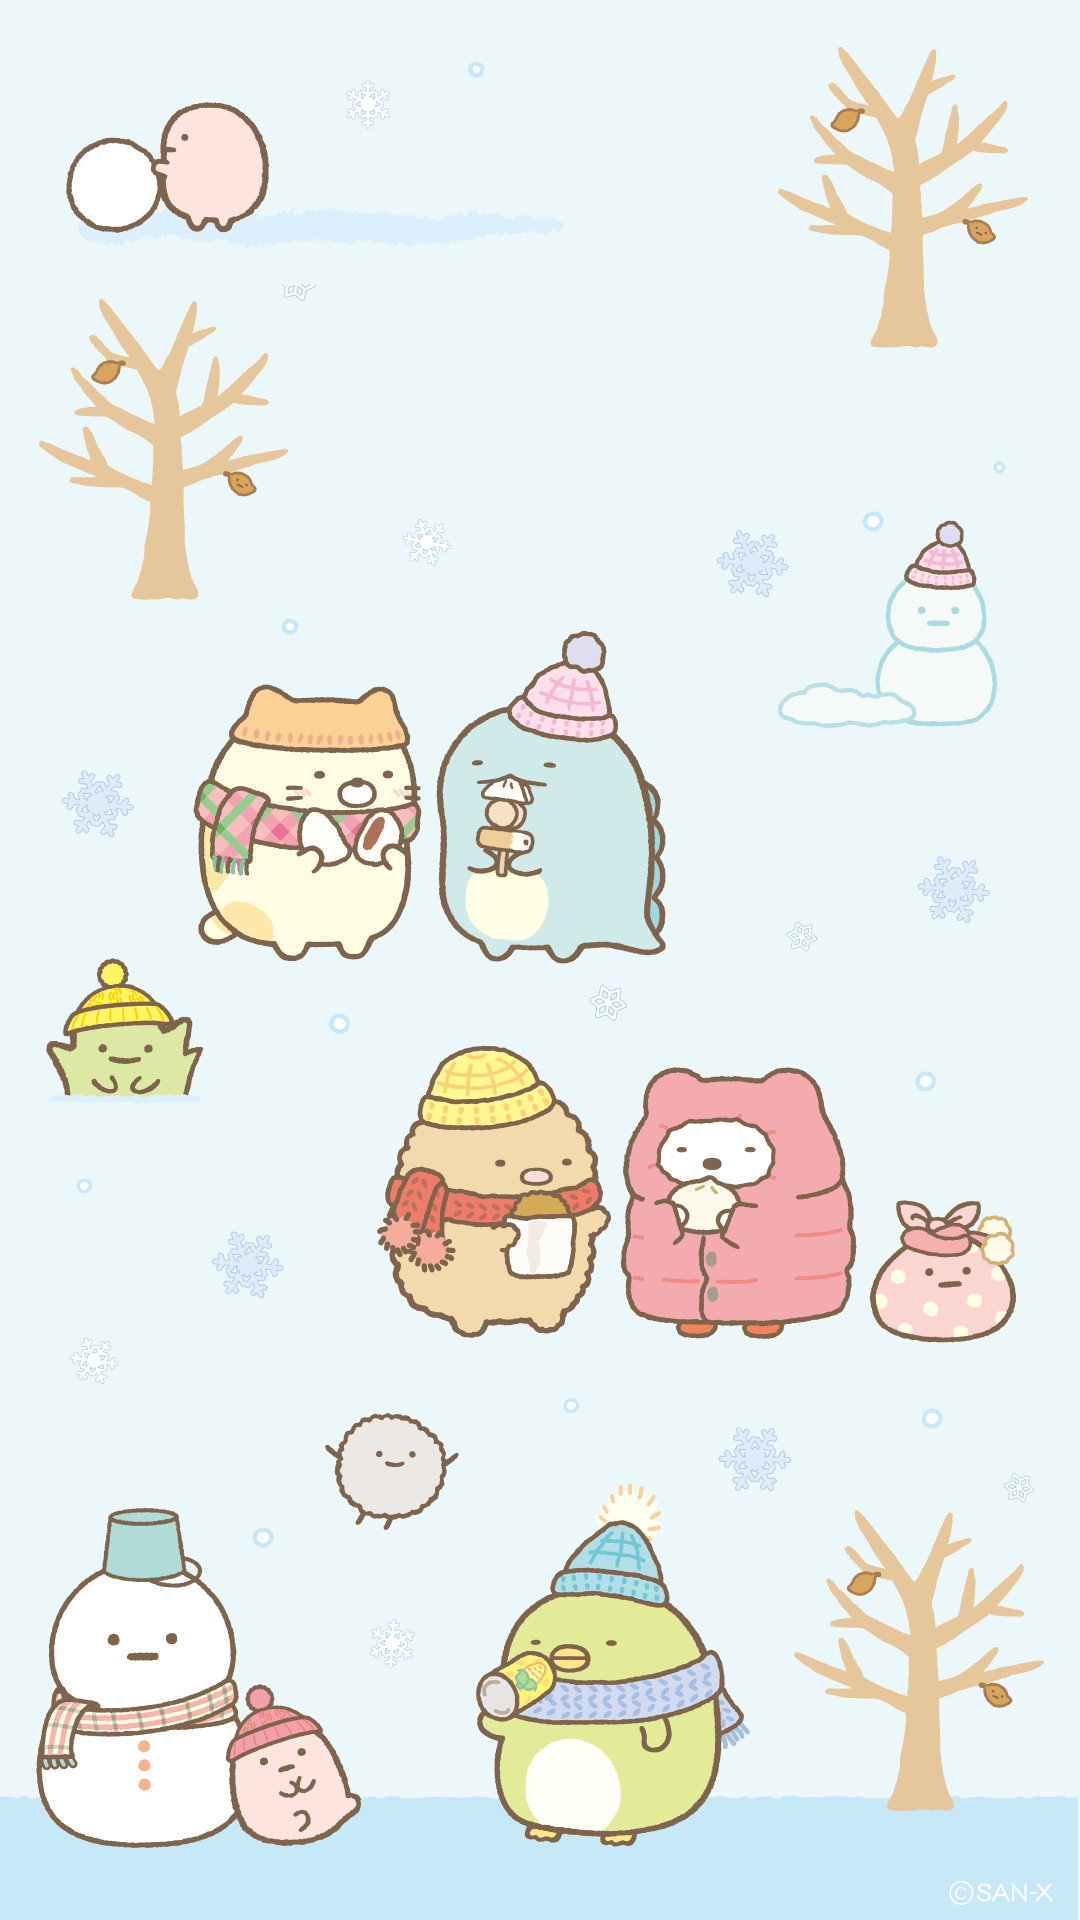 Free Kawaii Wallpapers For Your Phone & Computer